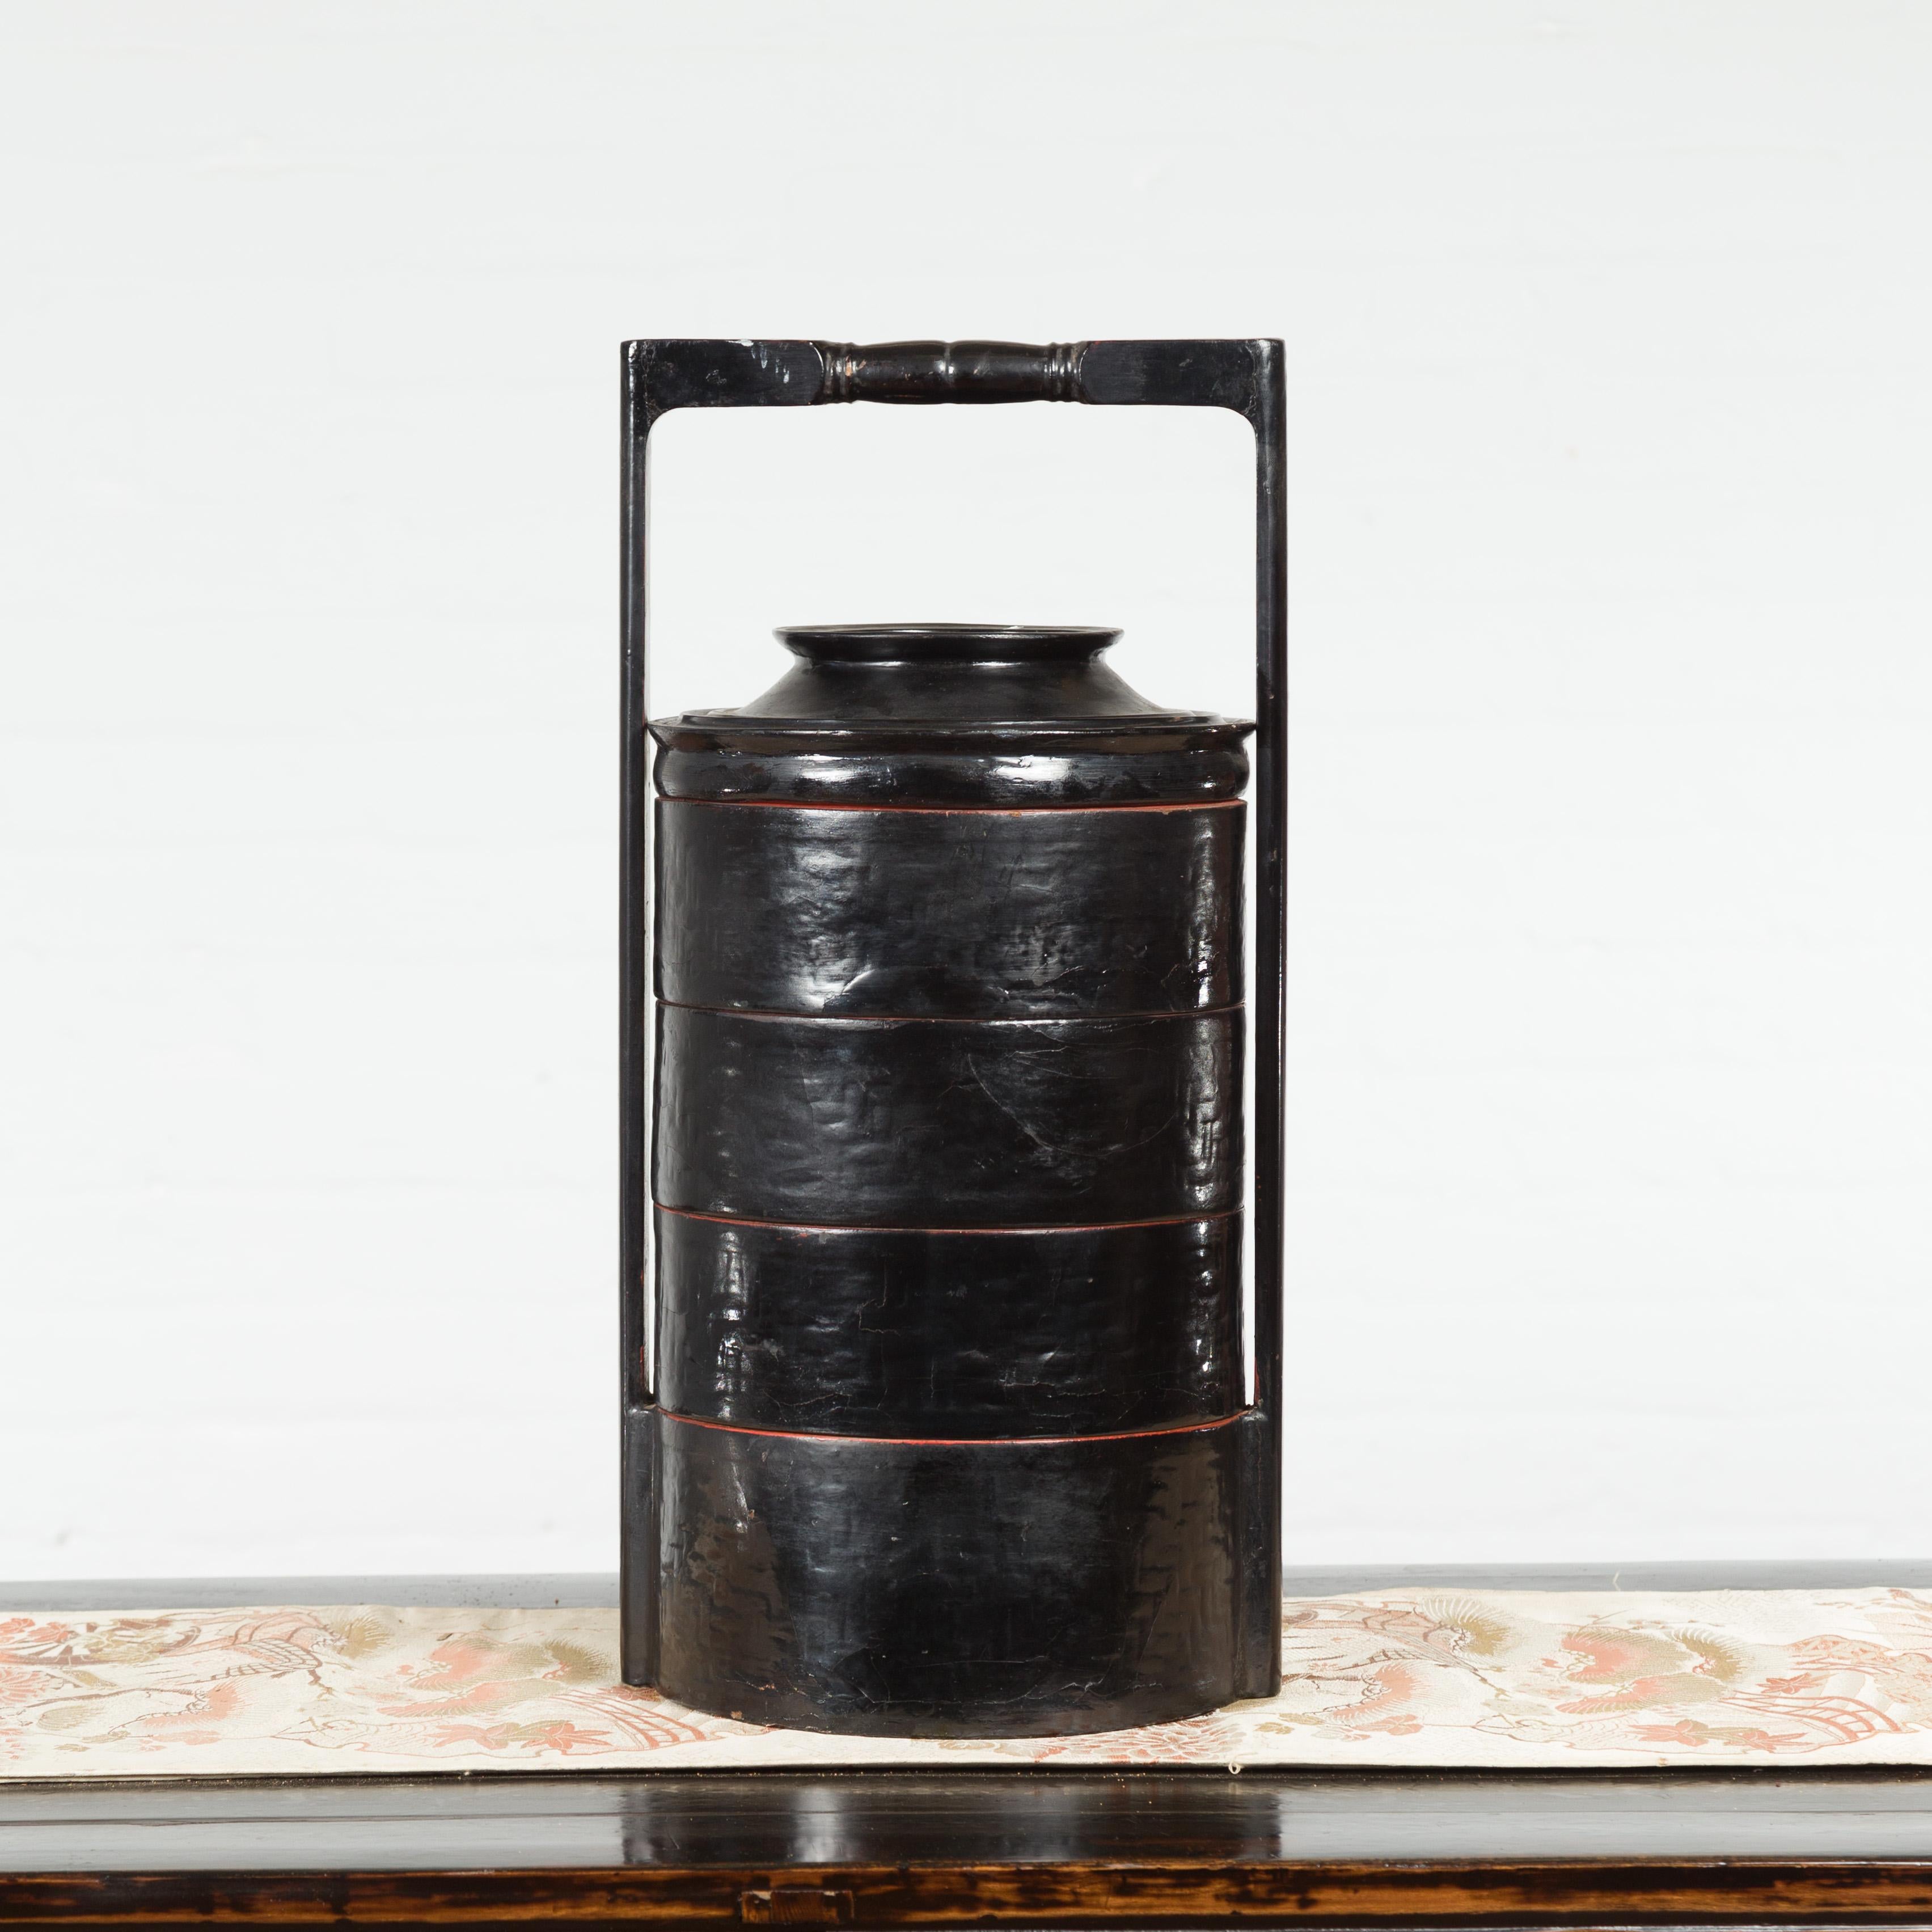 A Burmese vintage black lacquered picnic basket from the mid 20th century, with large handle, seven individual compartments and lid. Created in Burma during the midcentury period, this picnic basket features a circular black lacquered body made of